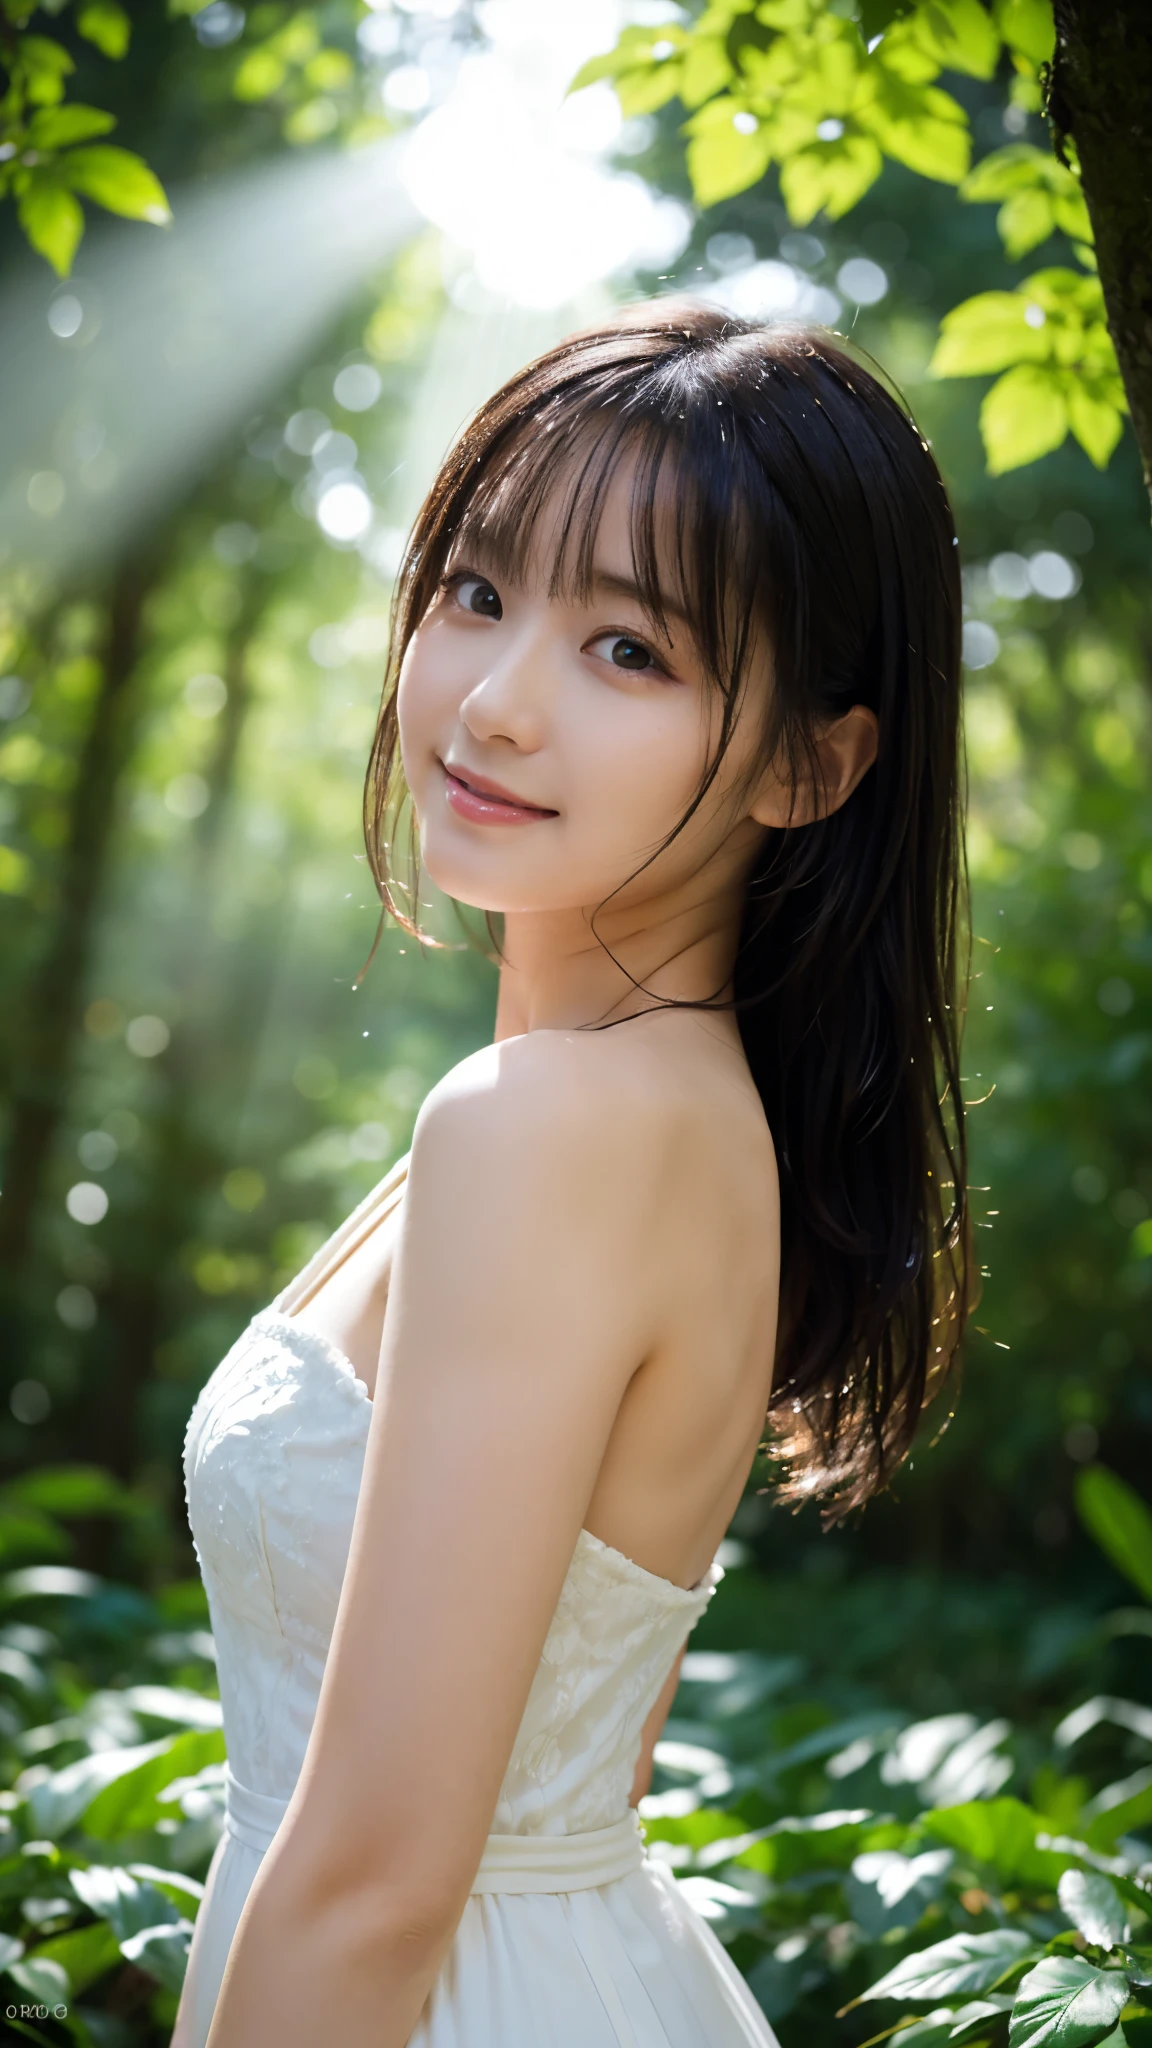 (highest quality,masterpiece:1.3,Ultra-high resolution),(Super detailed,Caustics,8k), (Photorealistic:1.4, RAW shooting),(in the forest),(A shower of light pours down),(Sunlight filtering through the trees),18-year-old,cute,Are standing,(smile),looking at the camera,Long black hair,Pure white long dress, Bust up shot,Natural light